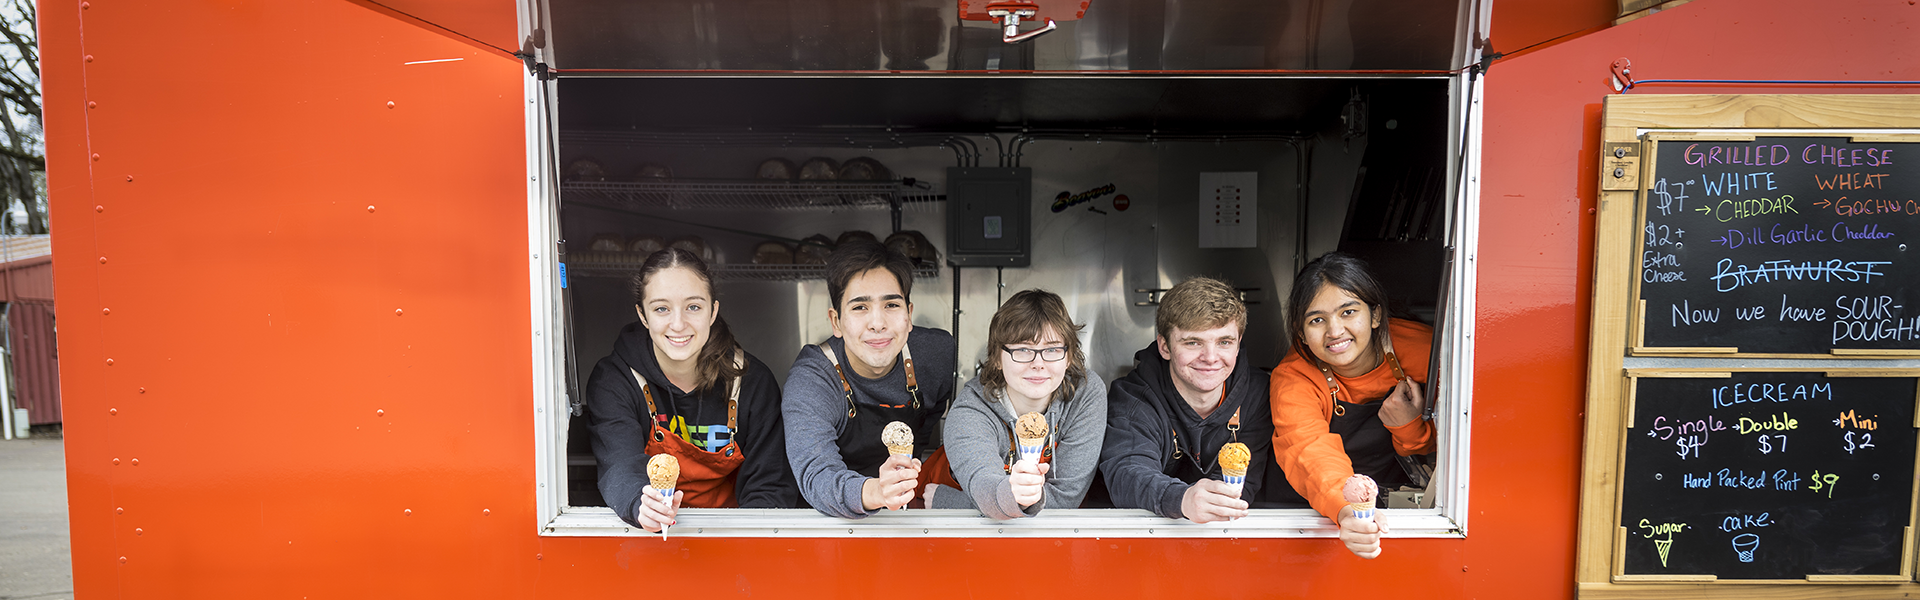 students leaning out of food truck window with ice cream cones in outstretched hands